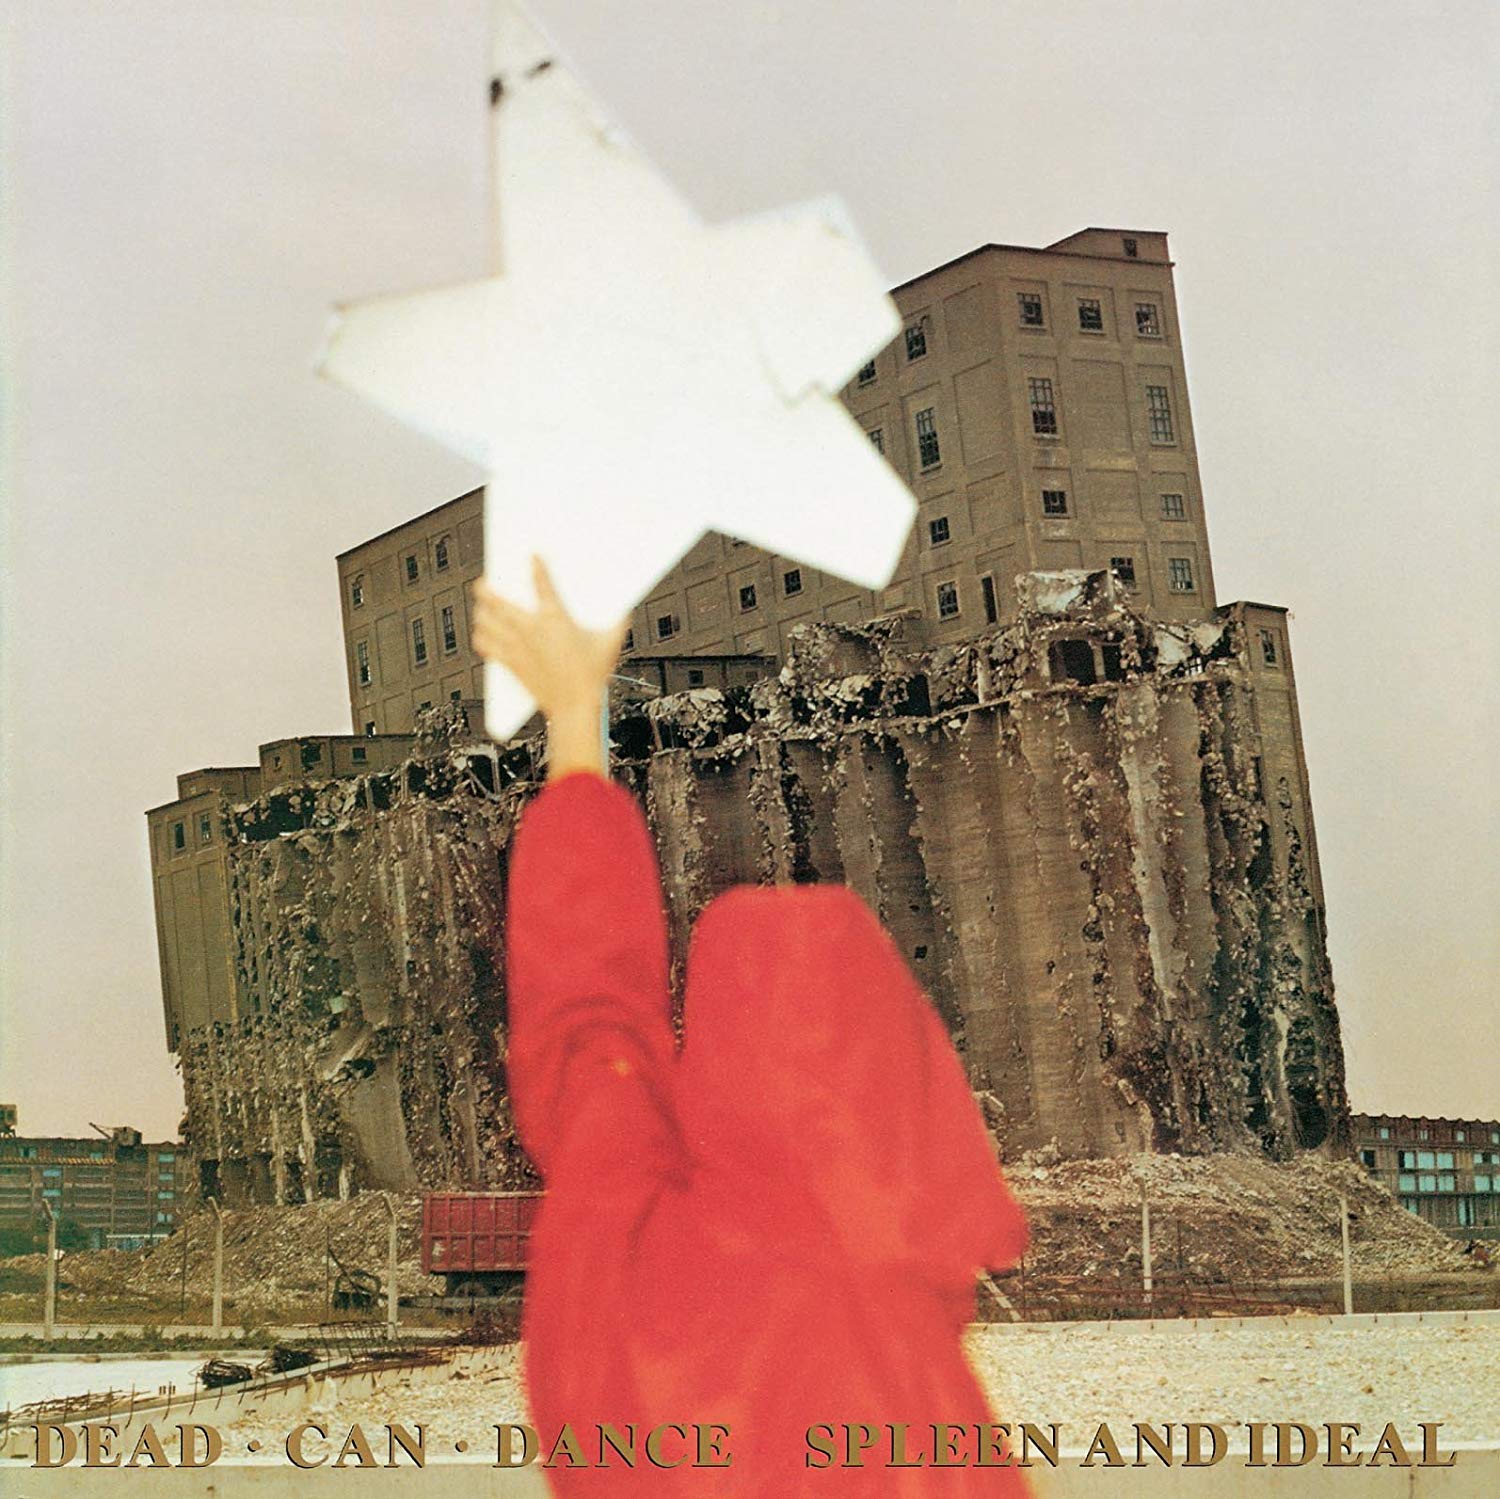 Classic Rock Covers Database: Dead Can Dance - Spleen and Ideal (1985)